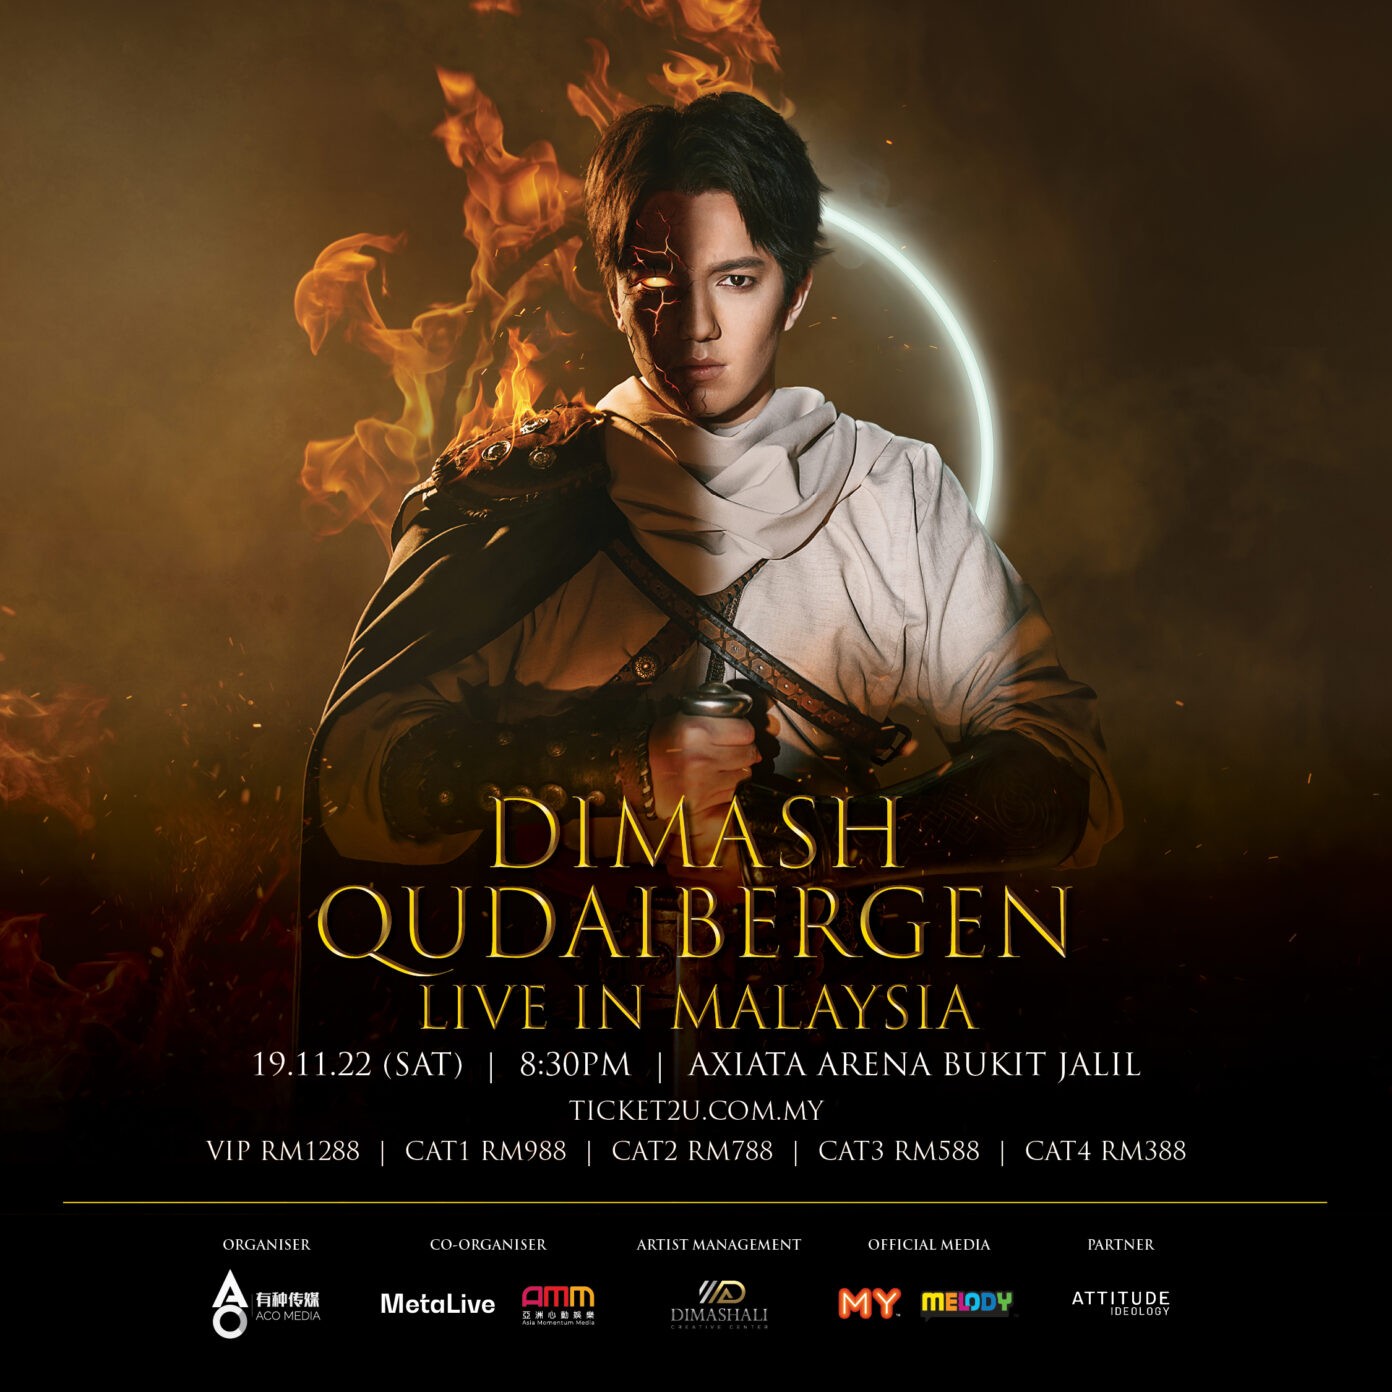 Dimash Qudaibergen will give a solo concert in MalaysiaInformation